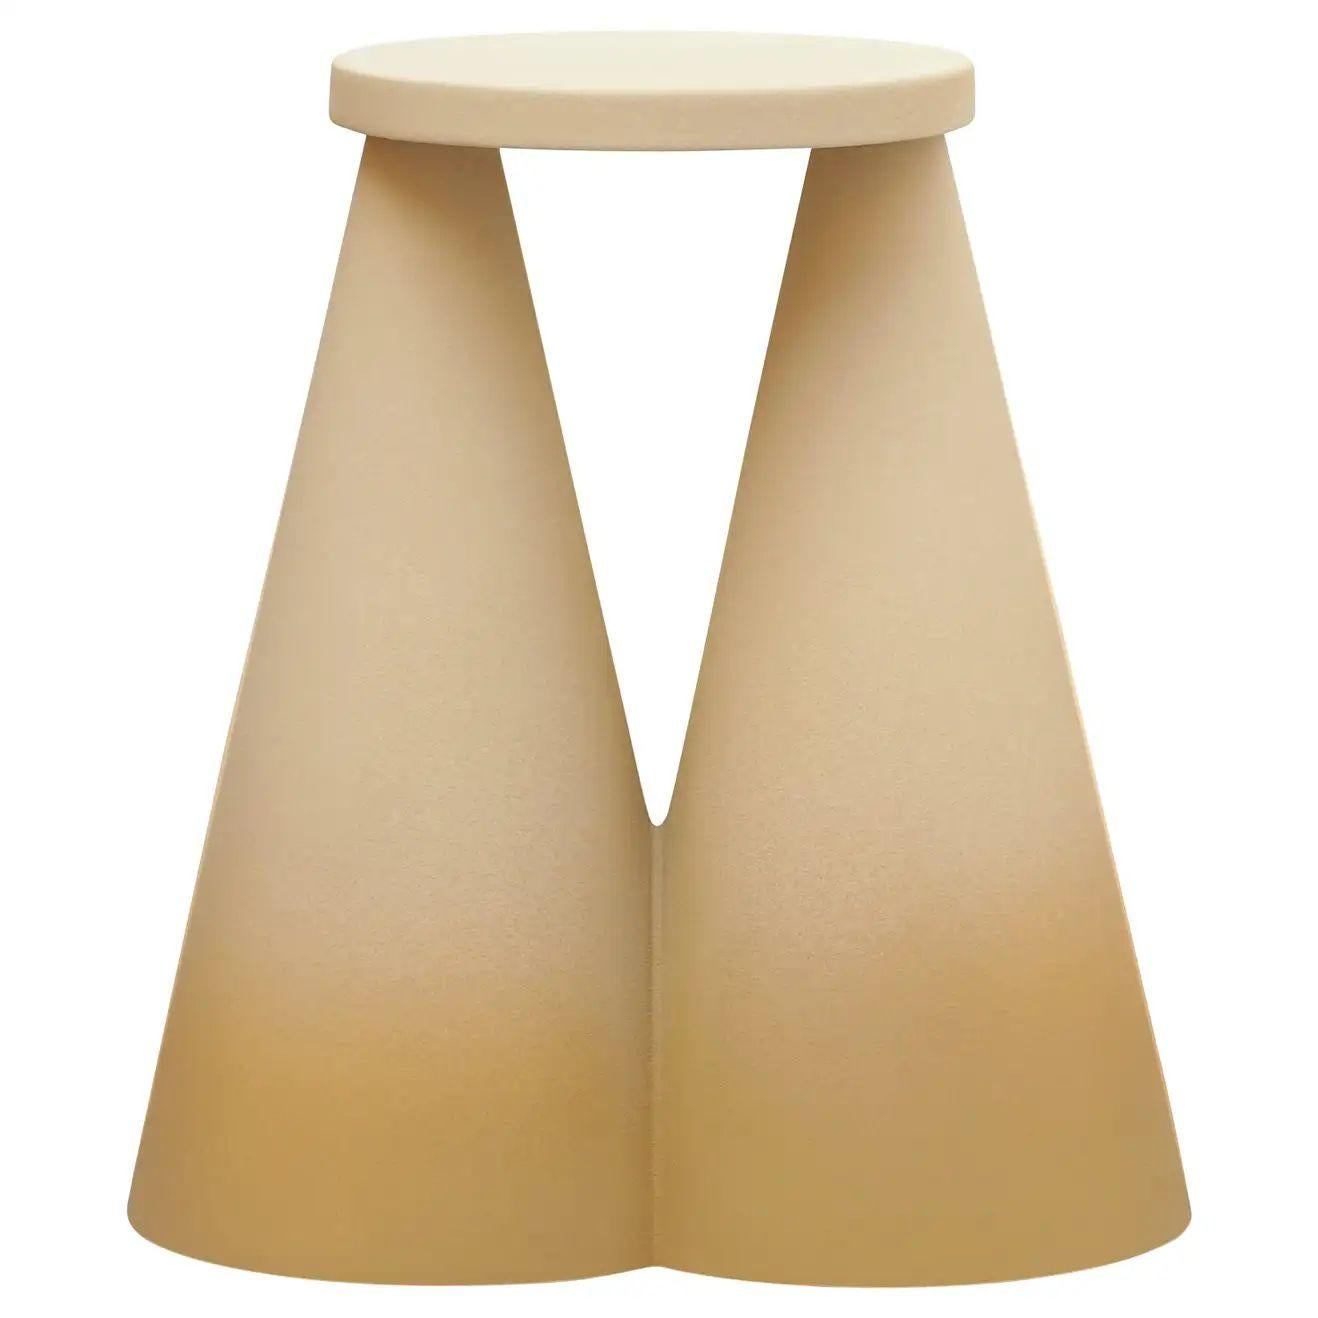 Pair of Isola Side Table by Cara Davide 4